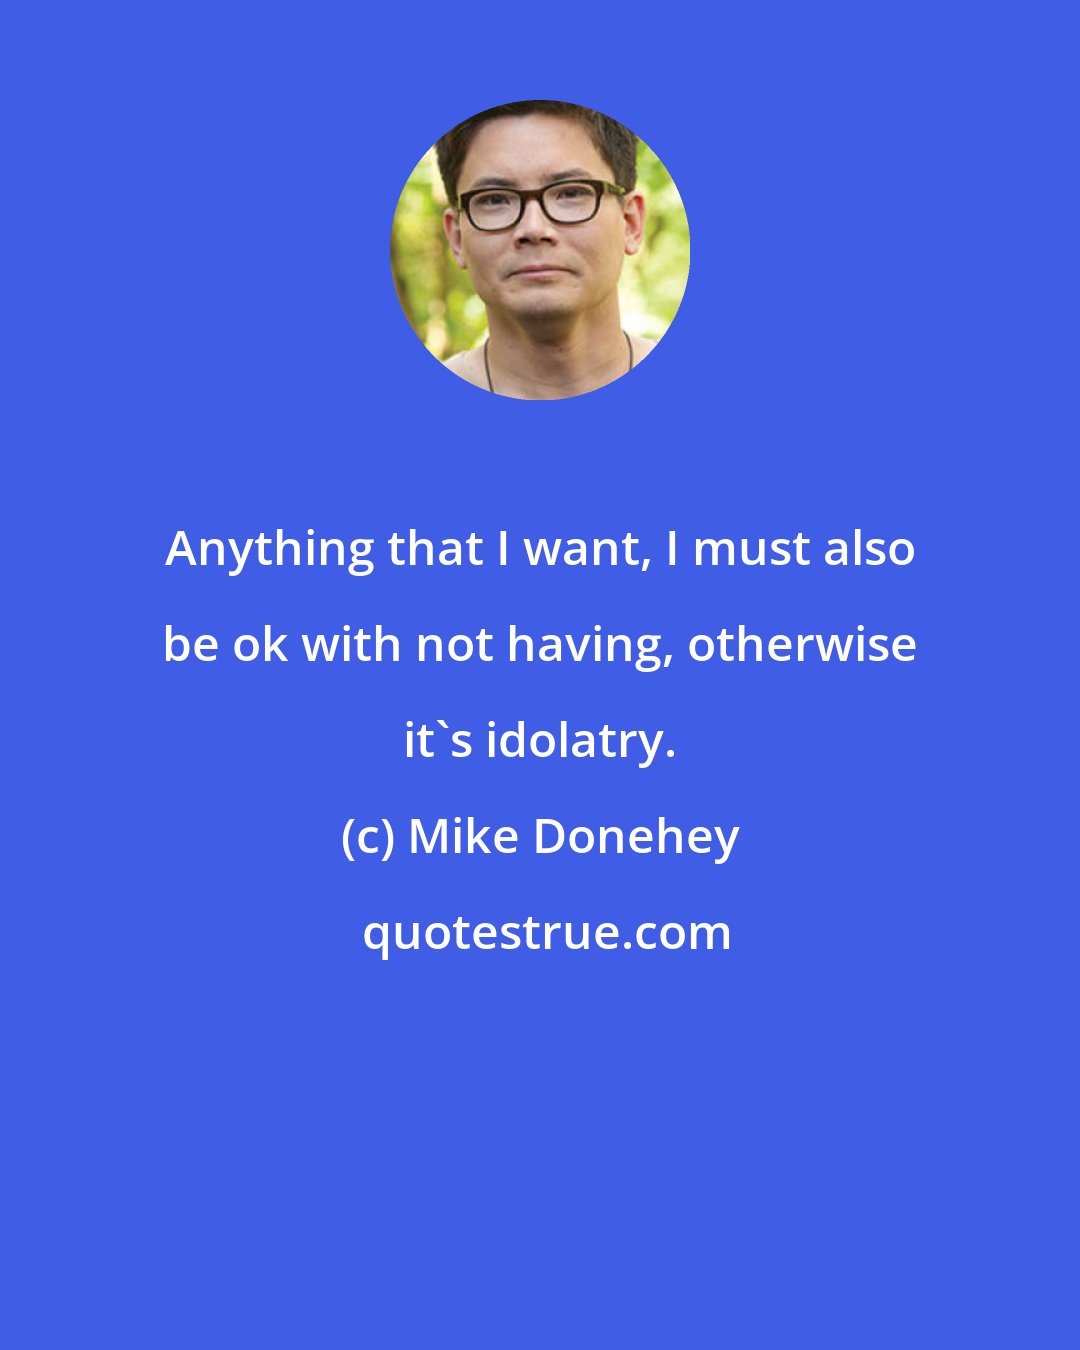 Mike Donehey: Anything that I want, I must also be ok with not having, otherwise it's idolatry.